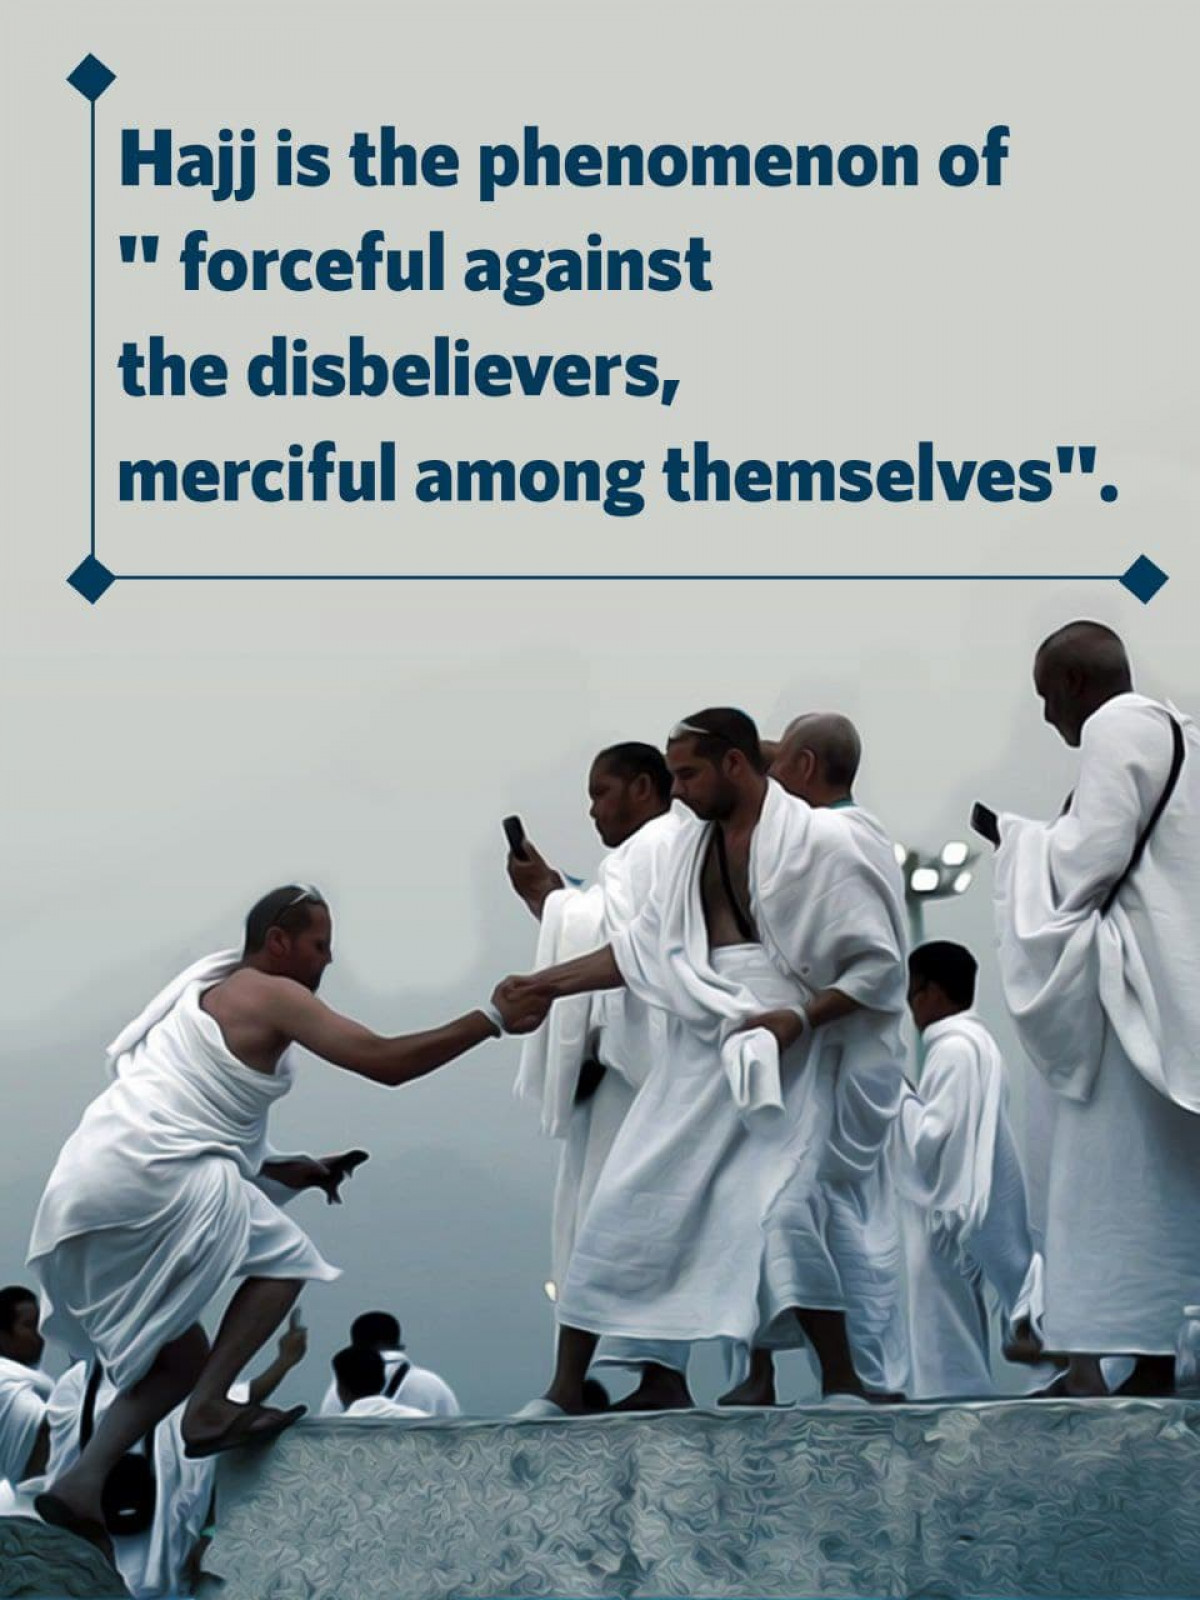 Hajj is the phenomenon of "forceful against the disbelievers, merciful among themselves"